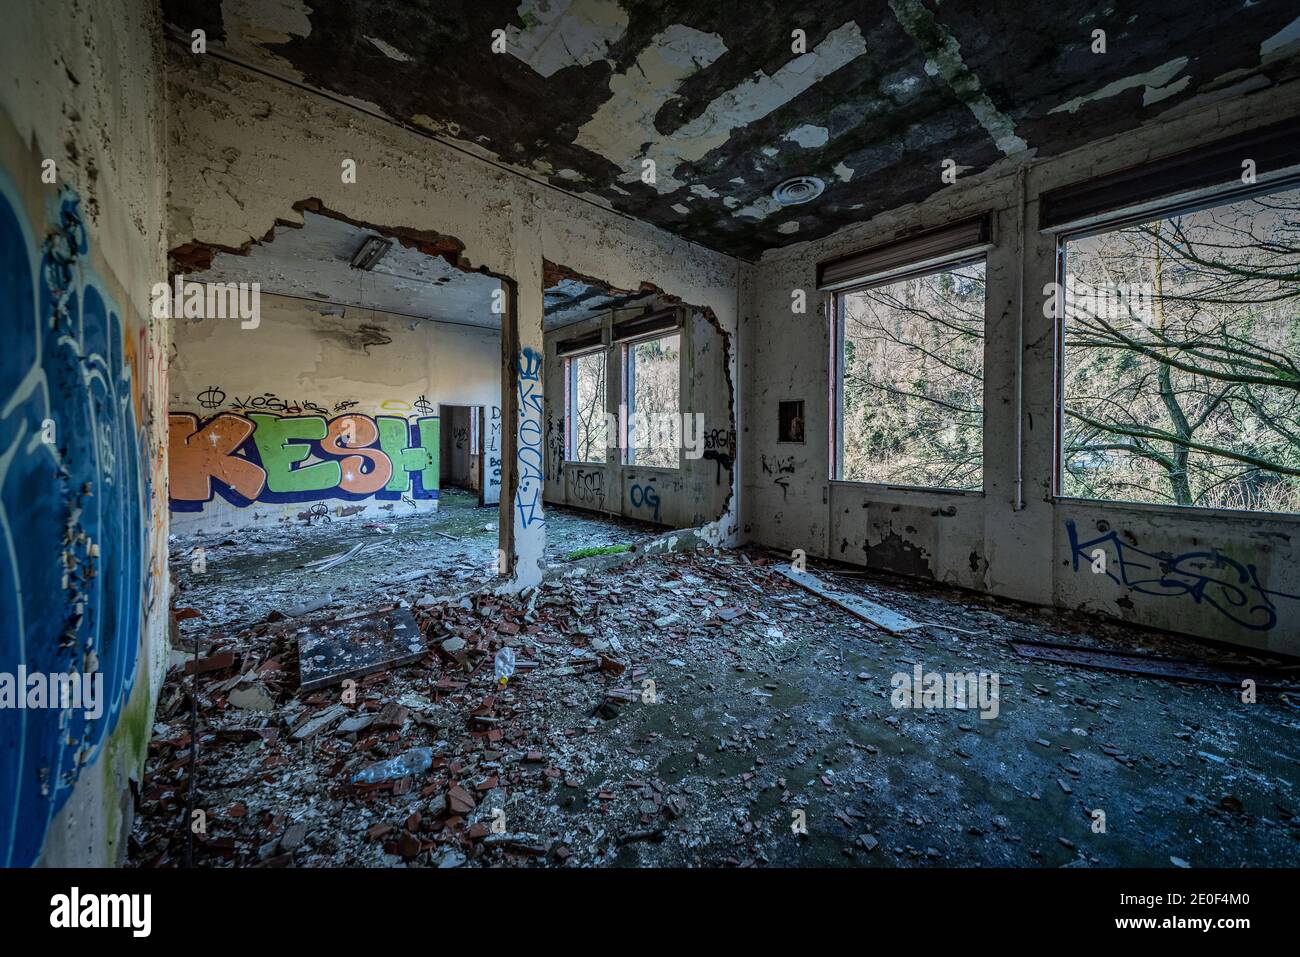 Urbex photography in a former abandoned cotton mill in Italy Stock Photo